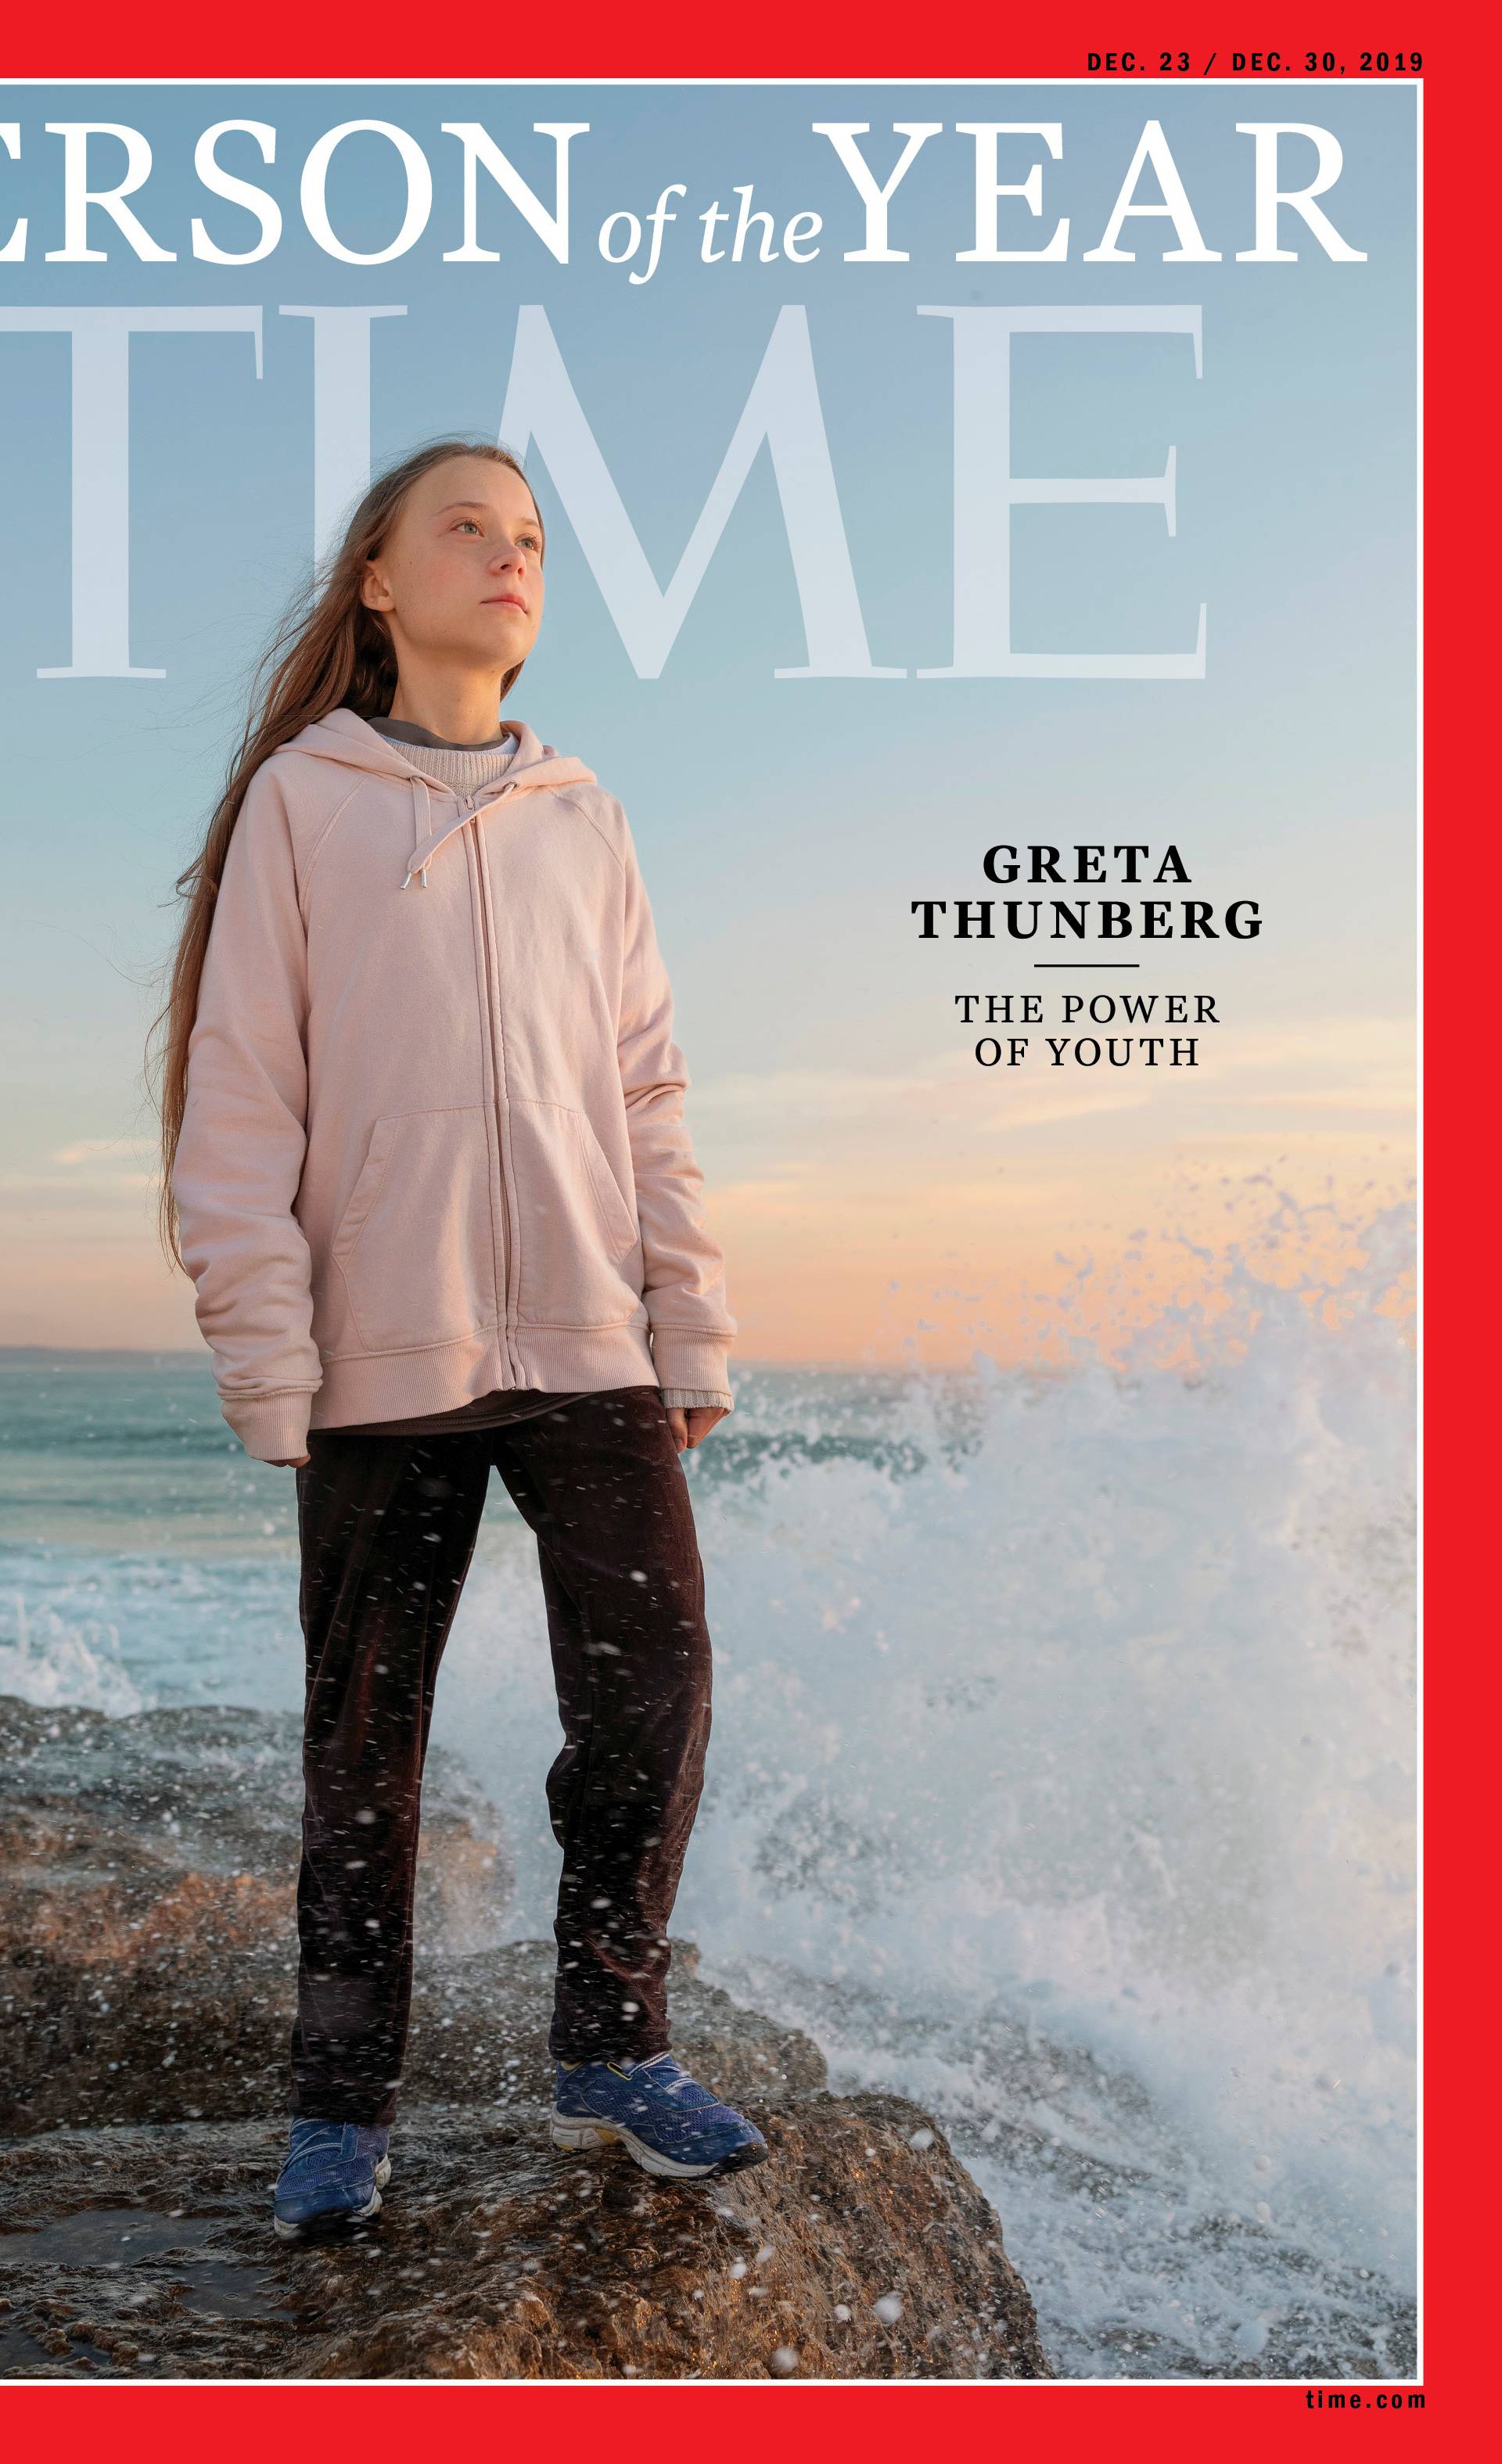 Time cover features Swedish teen climate activist Greta Thunberg named the magazine's Person of the Year for 2019